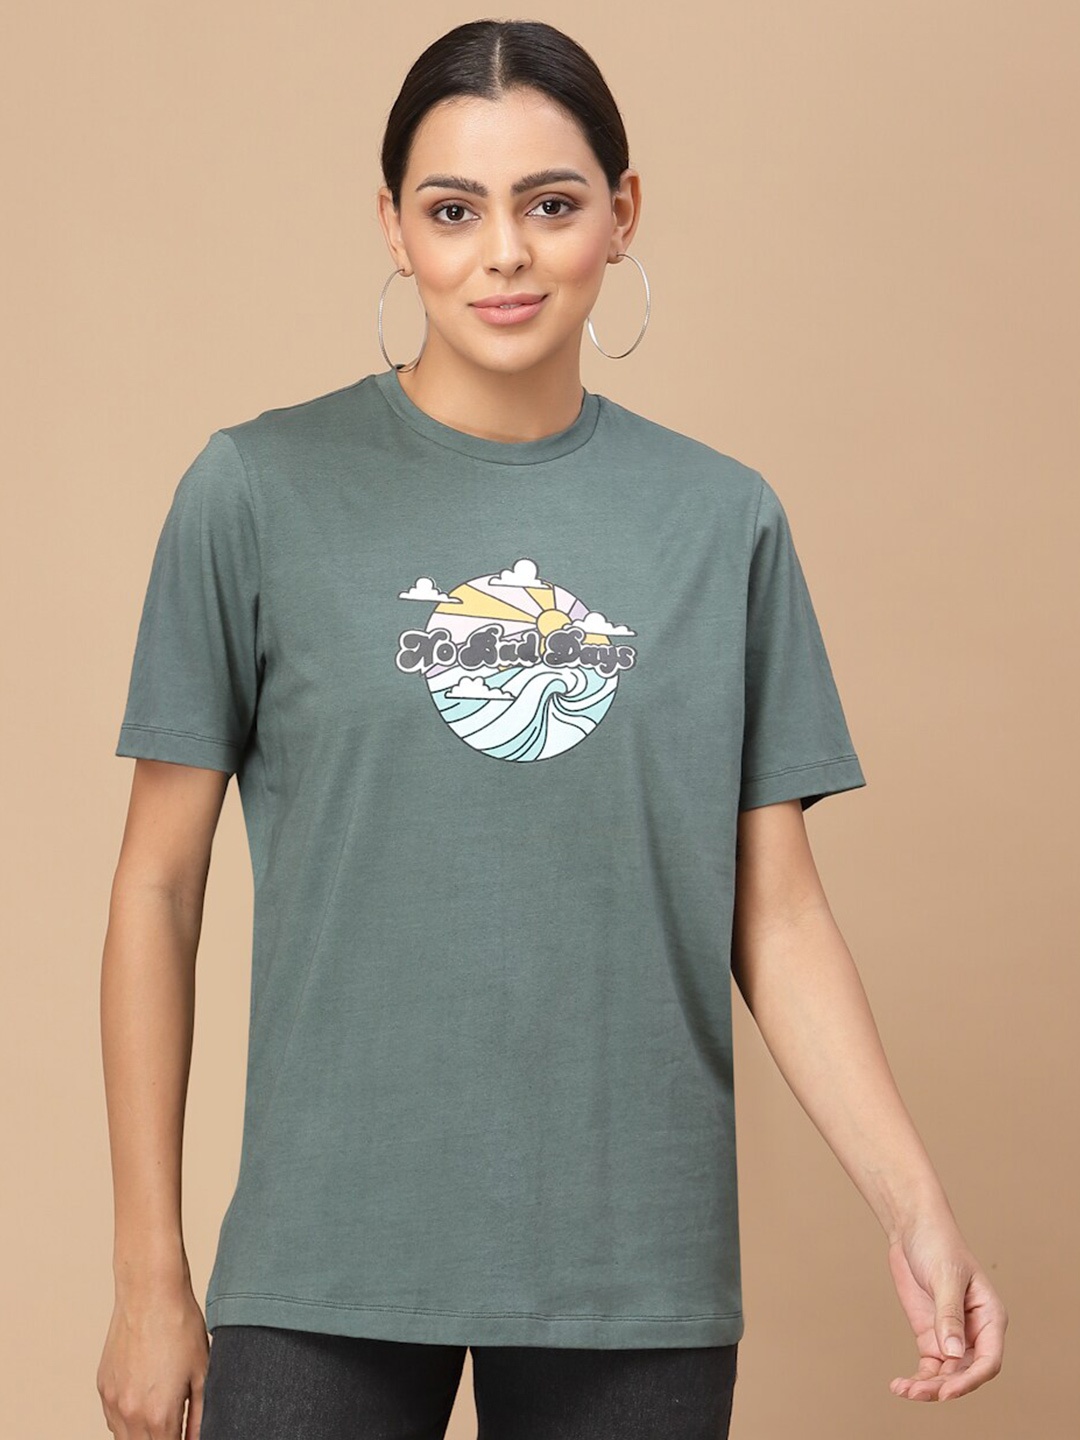 

HOUSE OF KKARMA Graphic Printed Round Neck Cotton Casual T-shirt, Green